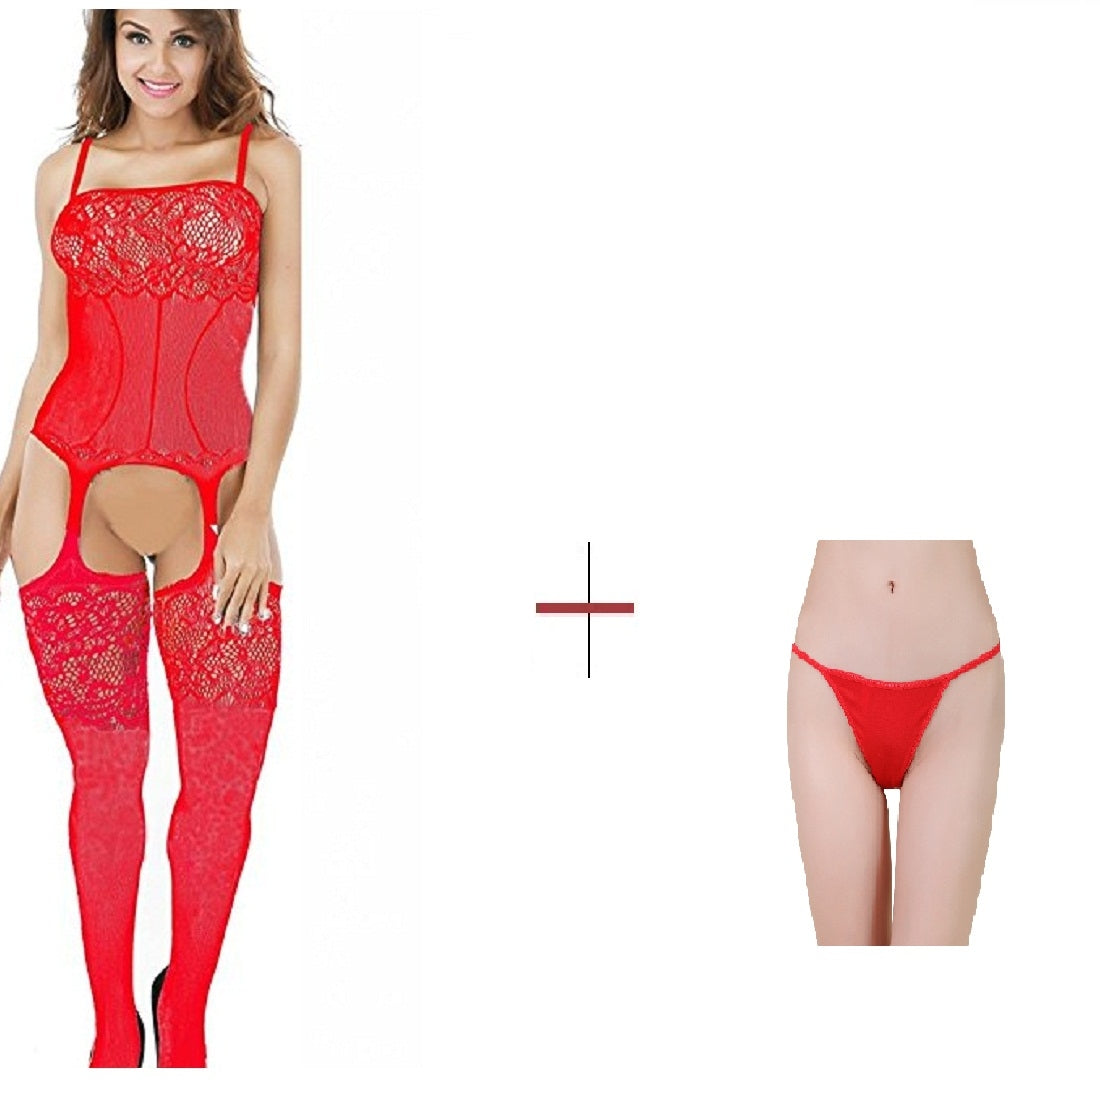 Kaamastra Red Crotchless Fishnet Bodystocking & Free Thong